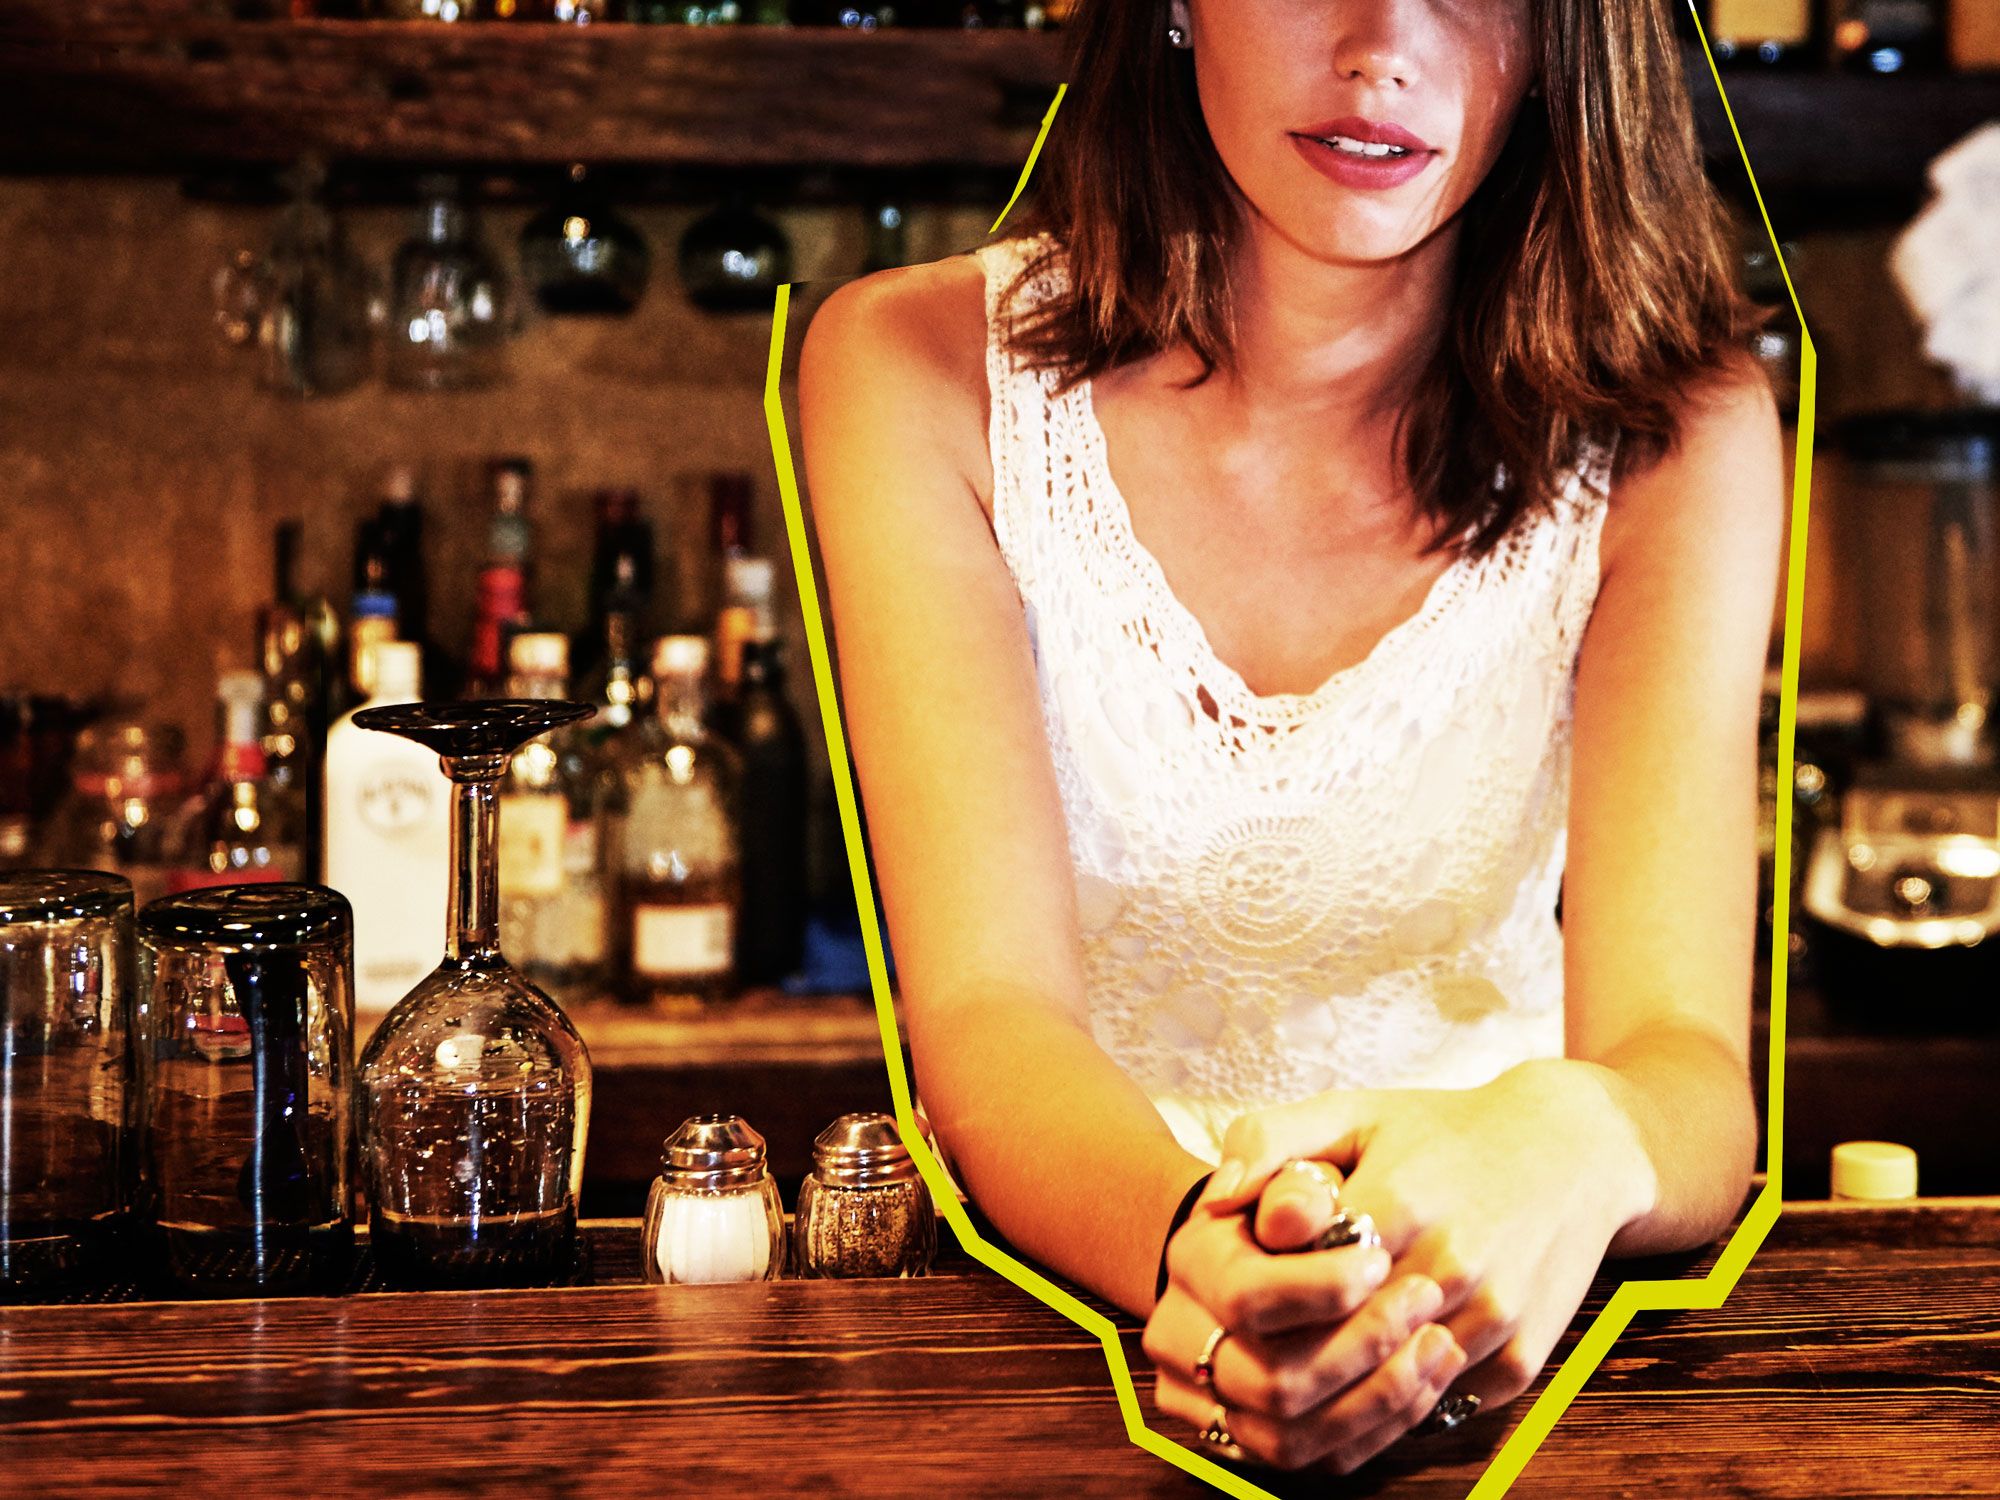 Female Bartenders Open Up About Being Sexually Harassed At Work image